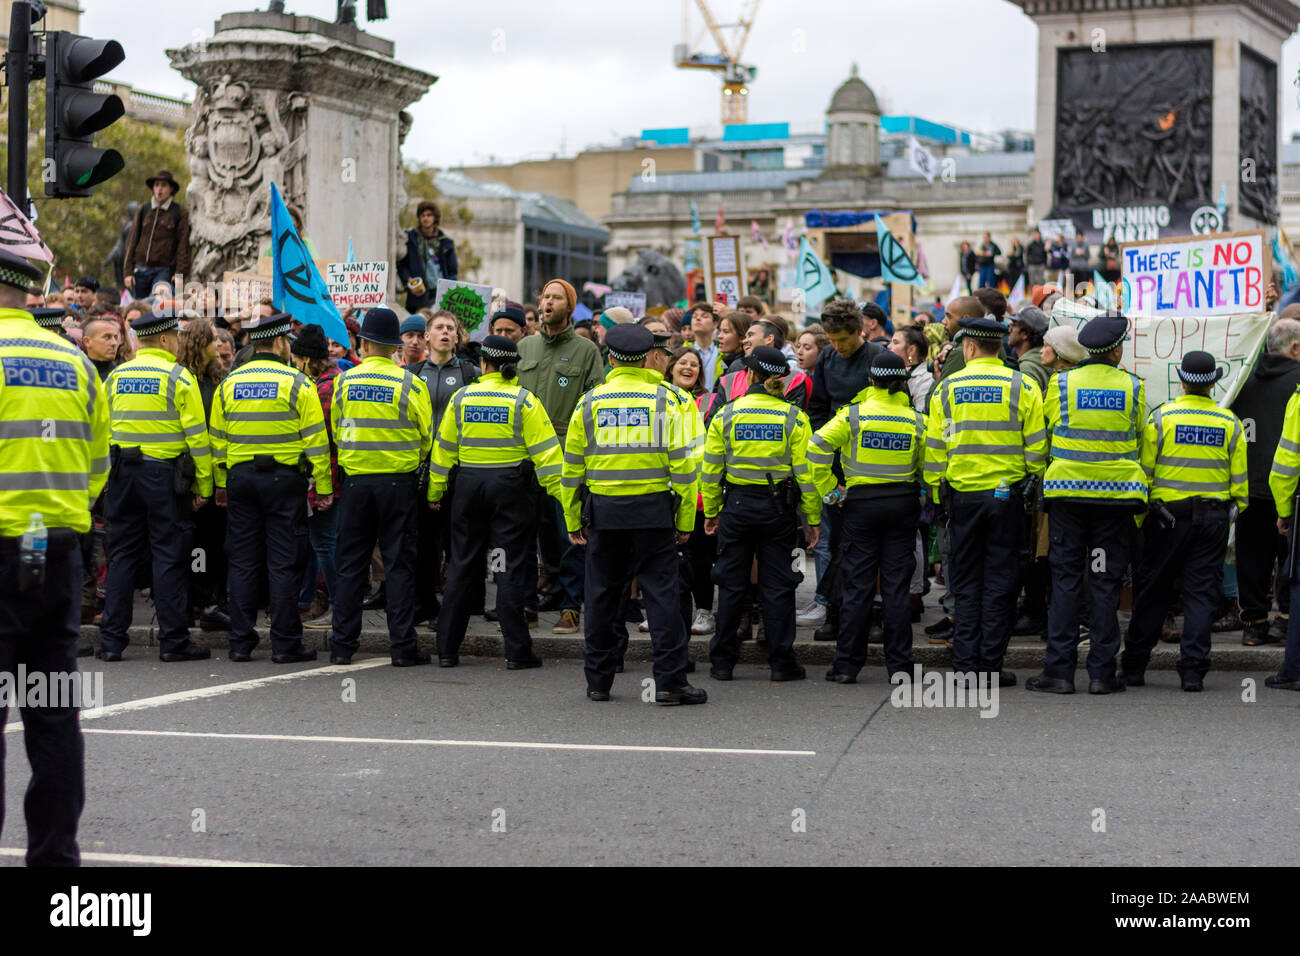 London, England –October 10, 2019: Police forces overlooking Extinction Rebellion protesters in Trafalgar Square London Stock Photo